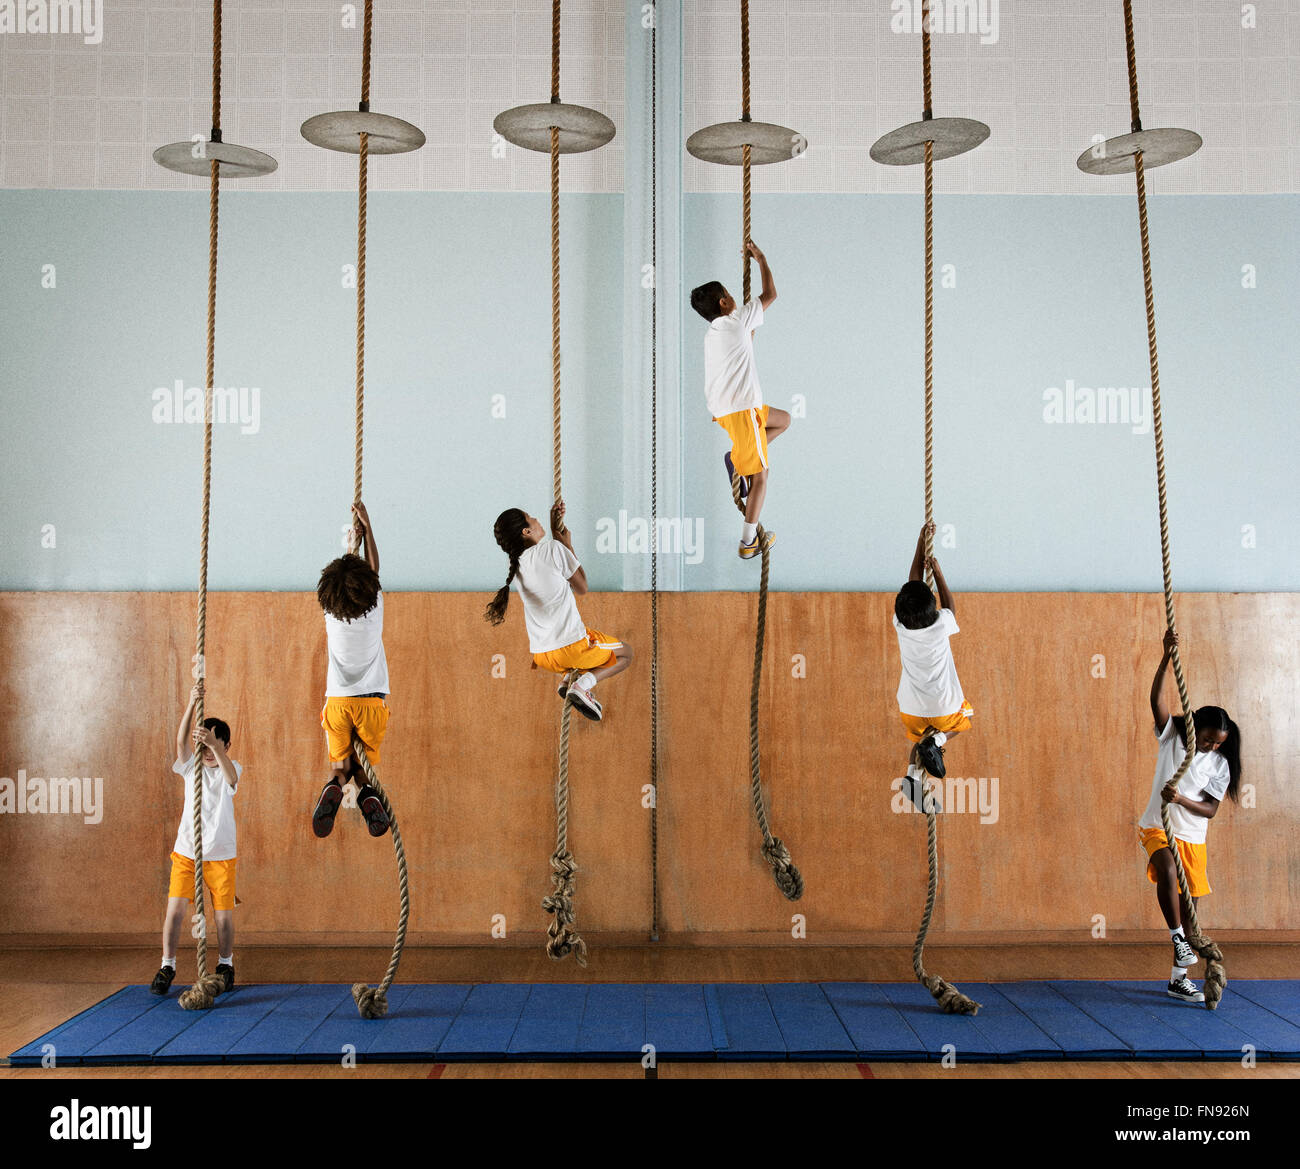 A group of children in a gym climbing up the ropes. Stock Photo